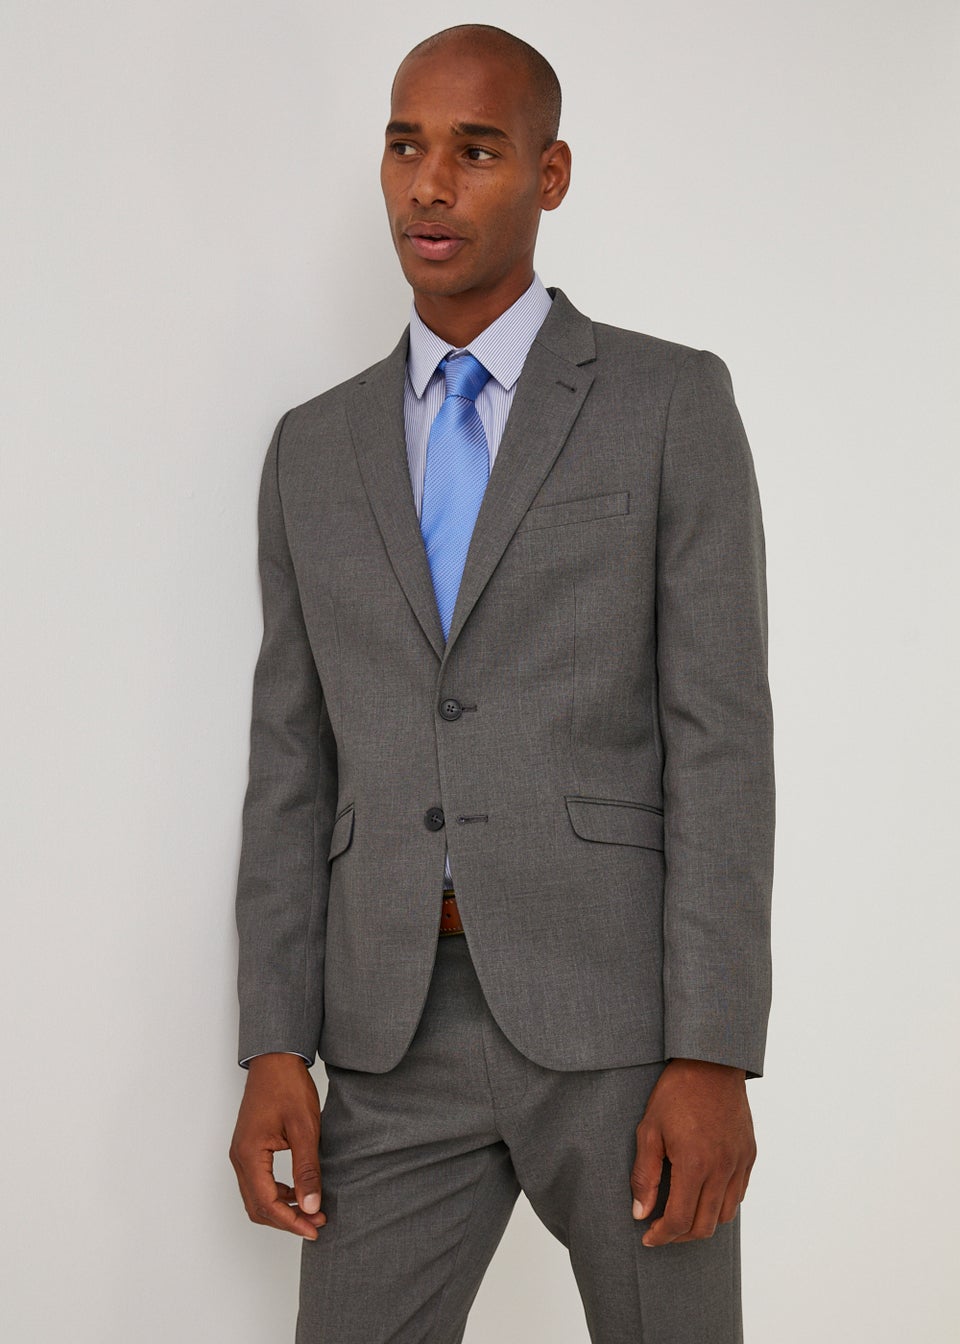 Taylor & Wright Austen Charcoal Skinny Fit Suit Jacket - Matalan